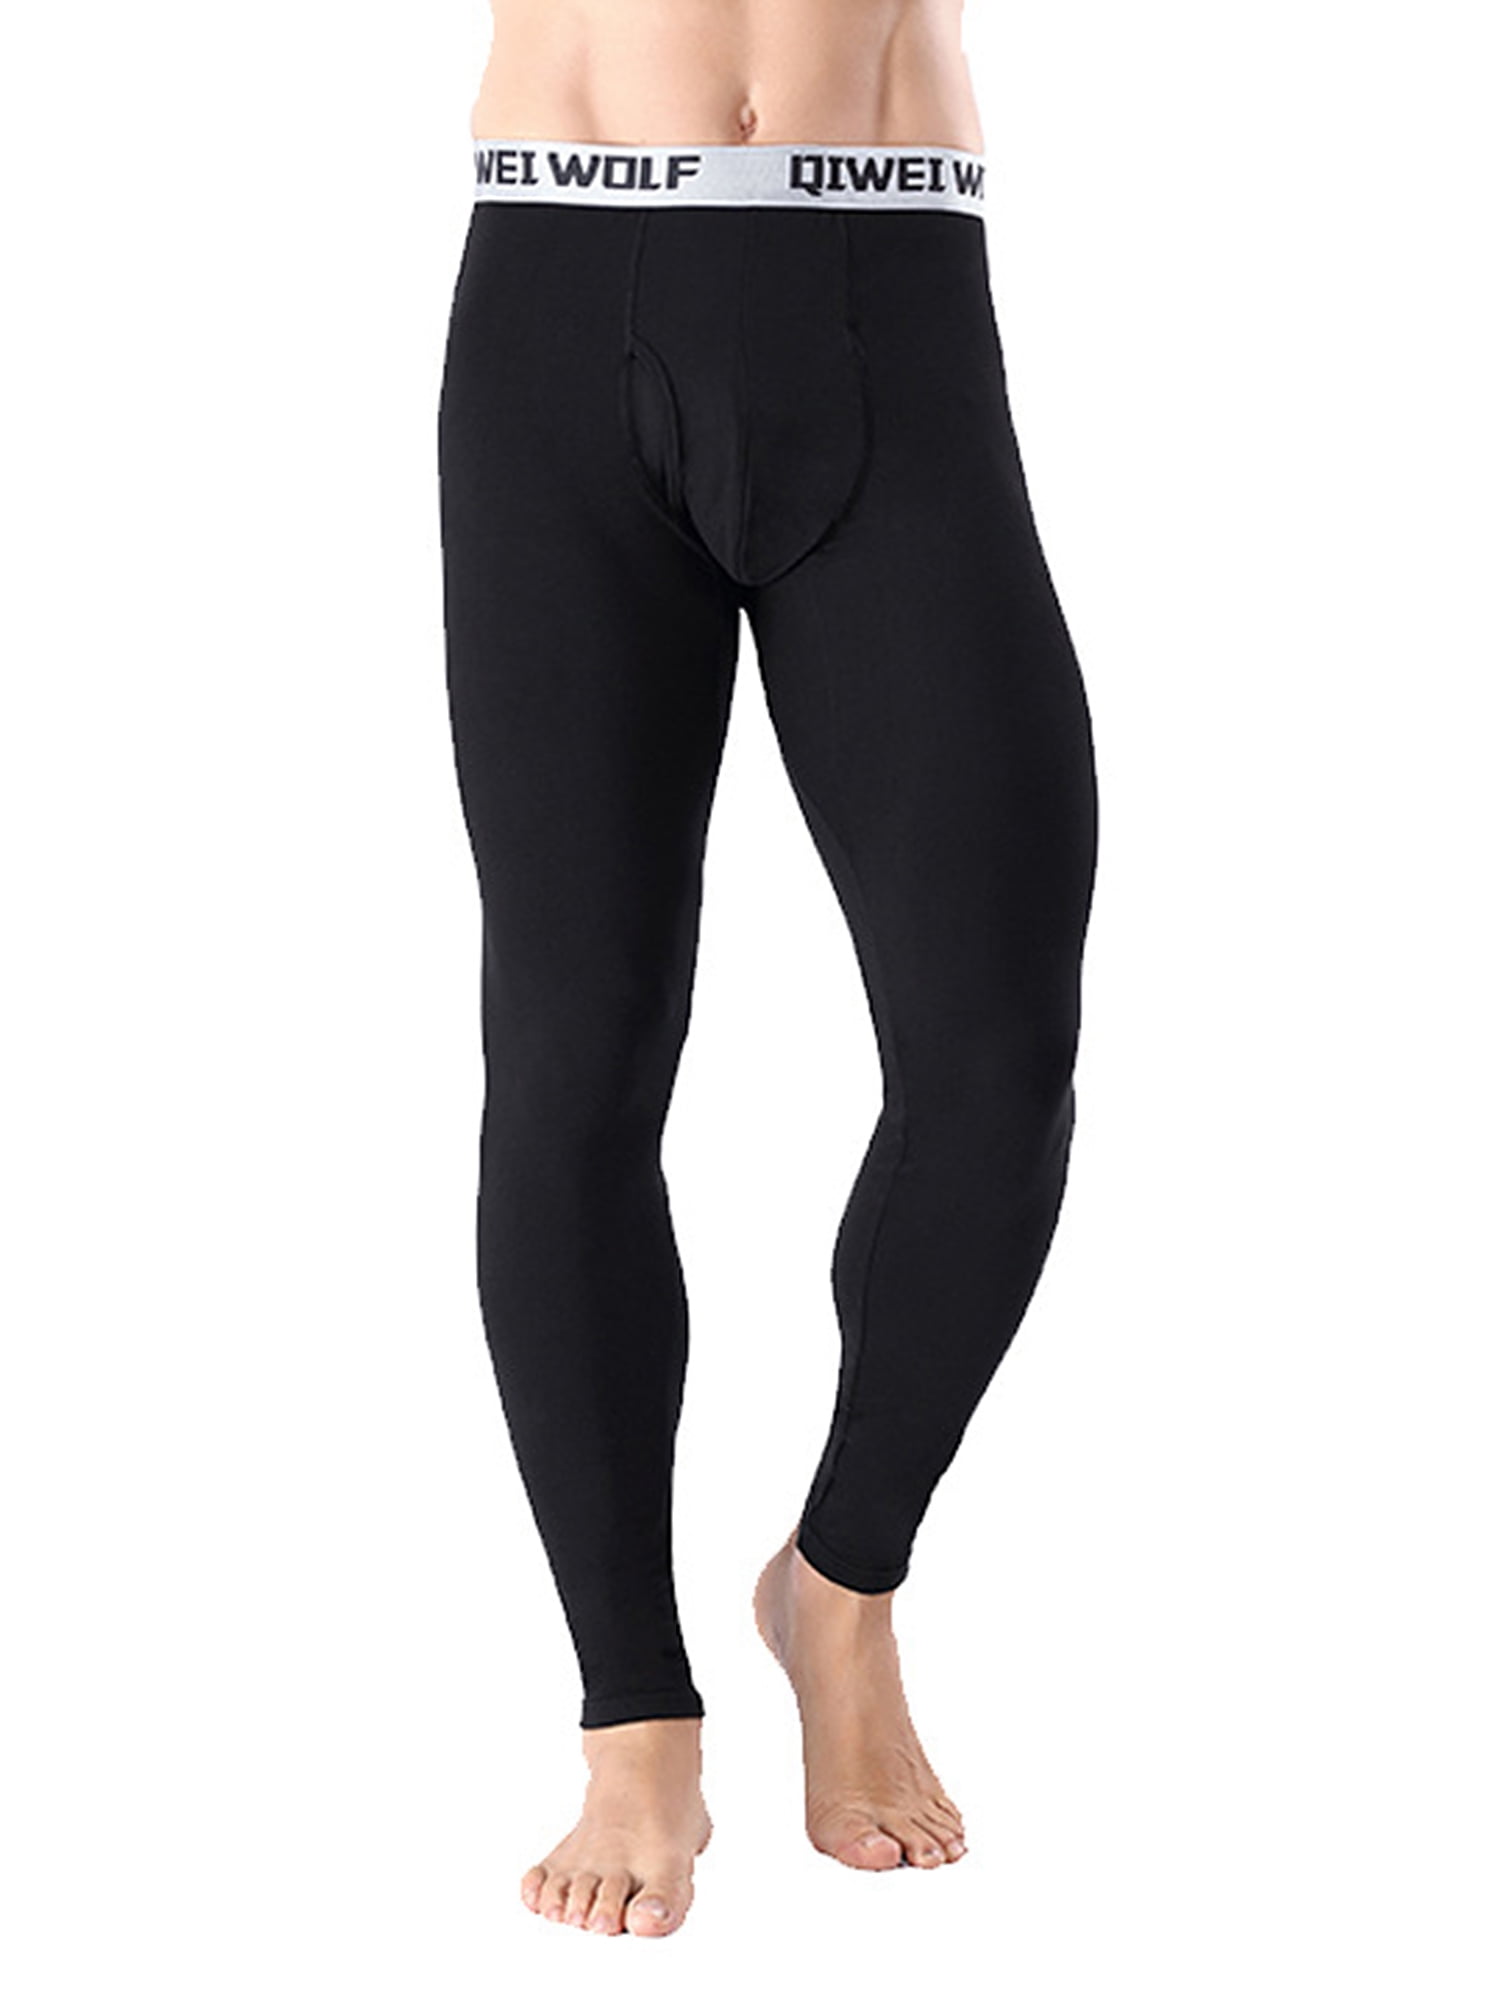 Men's Compression Tight Base Layer Pants Long johns Leggings Running Trousers 